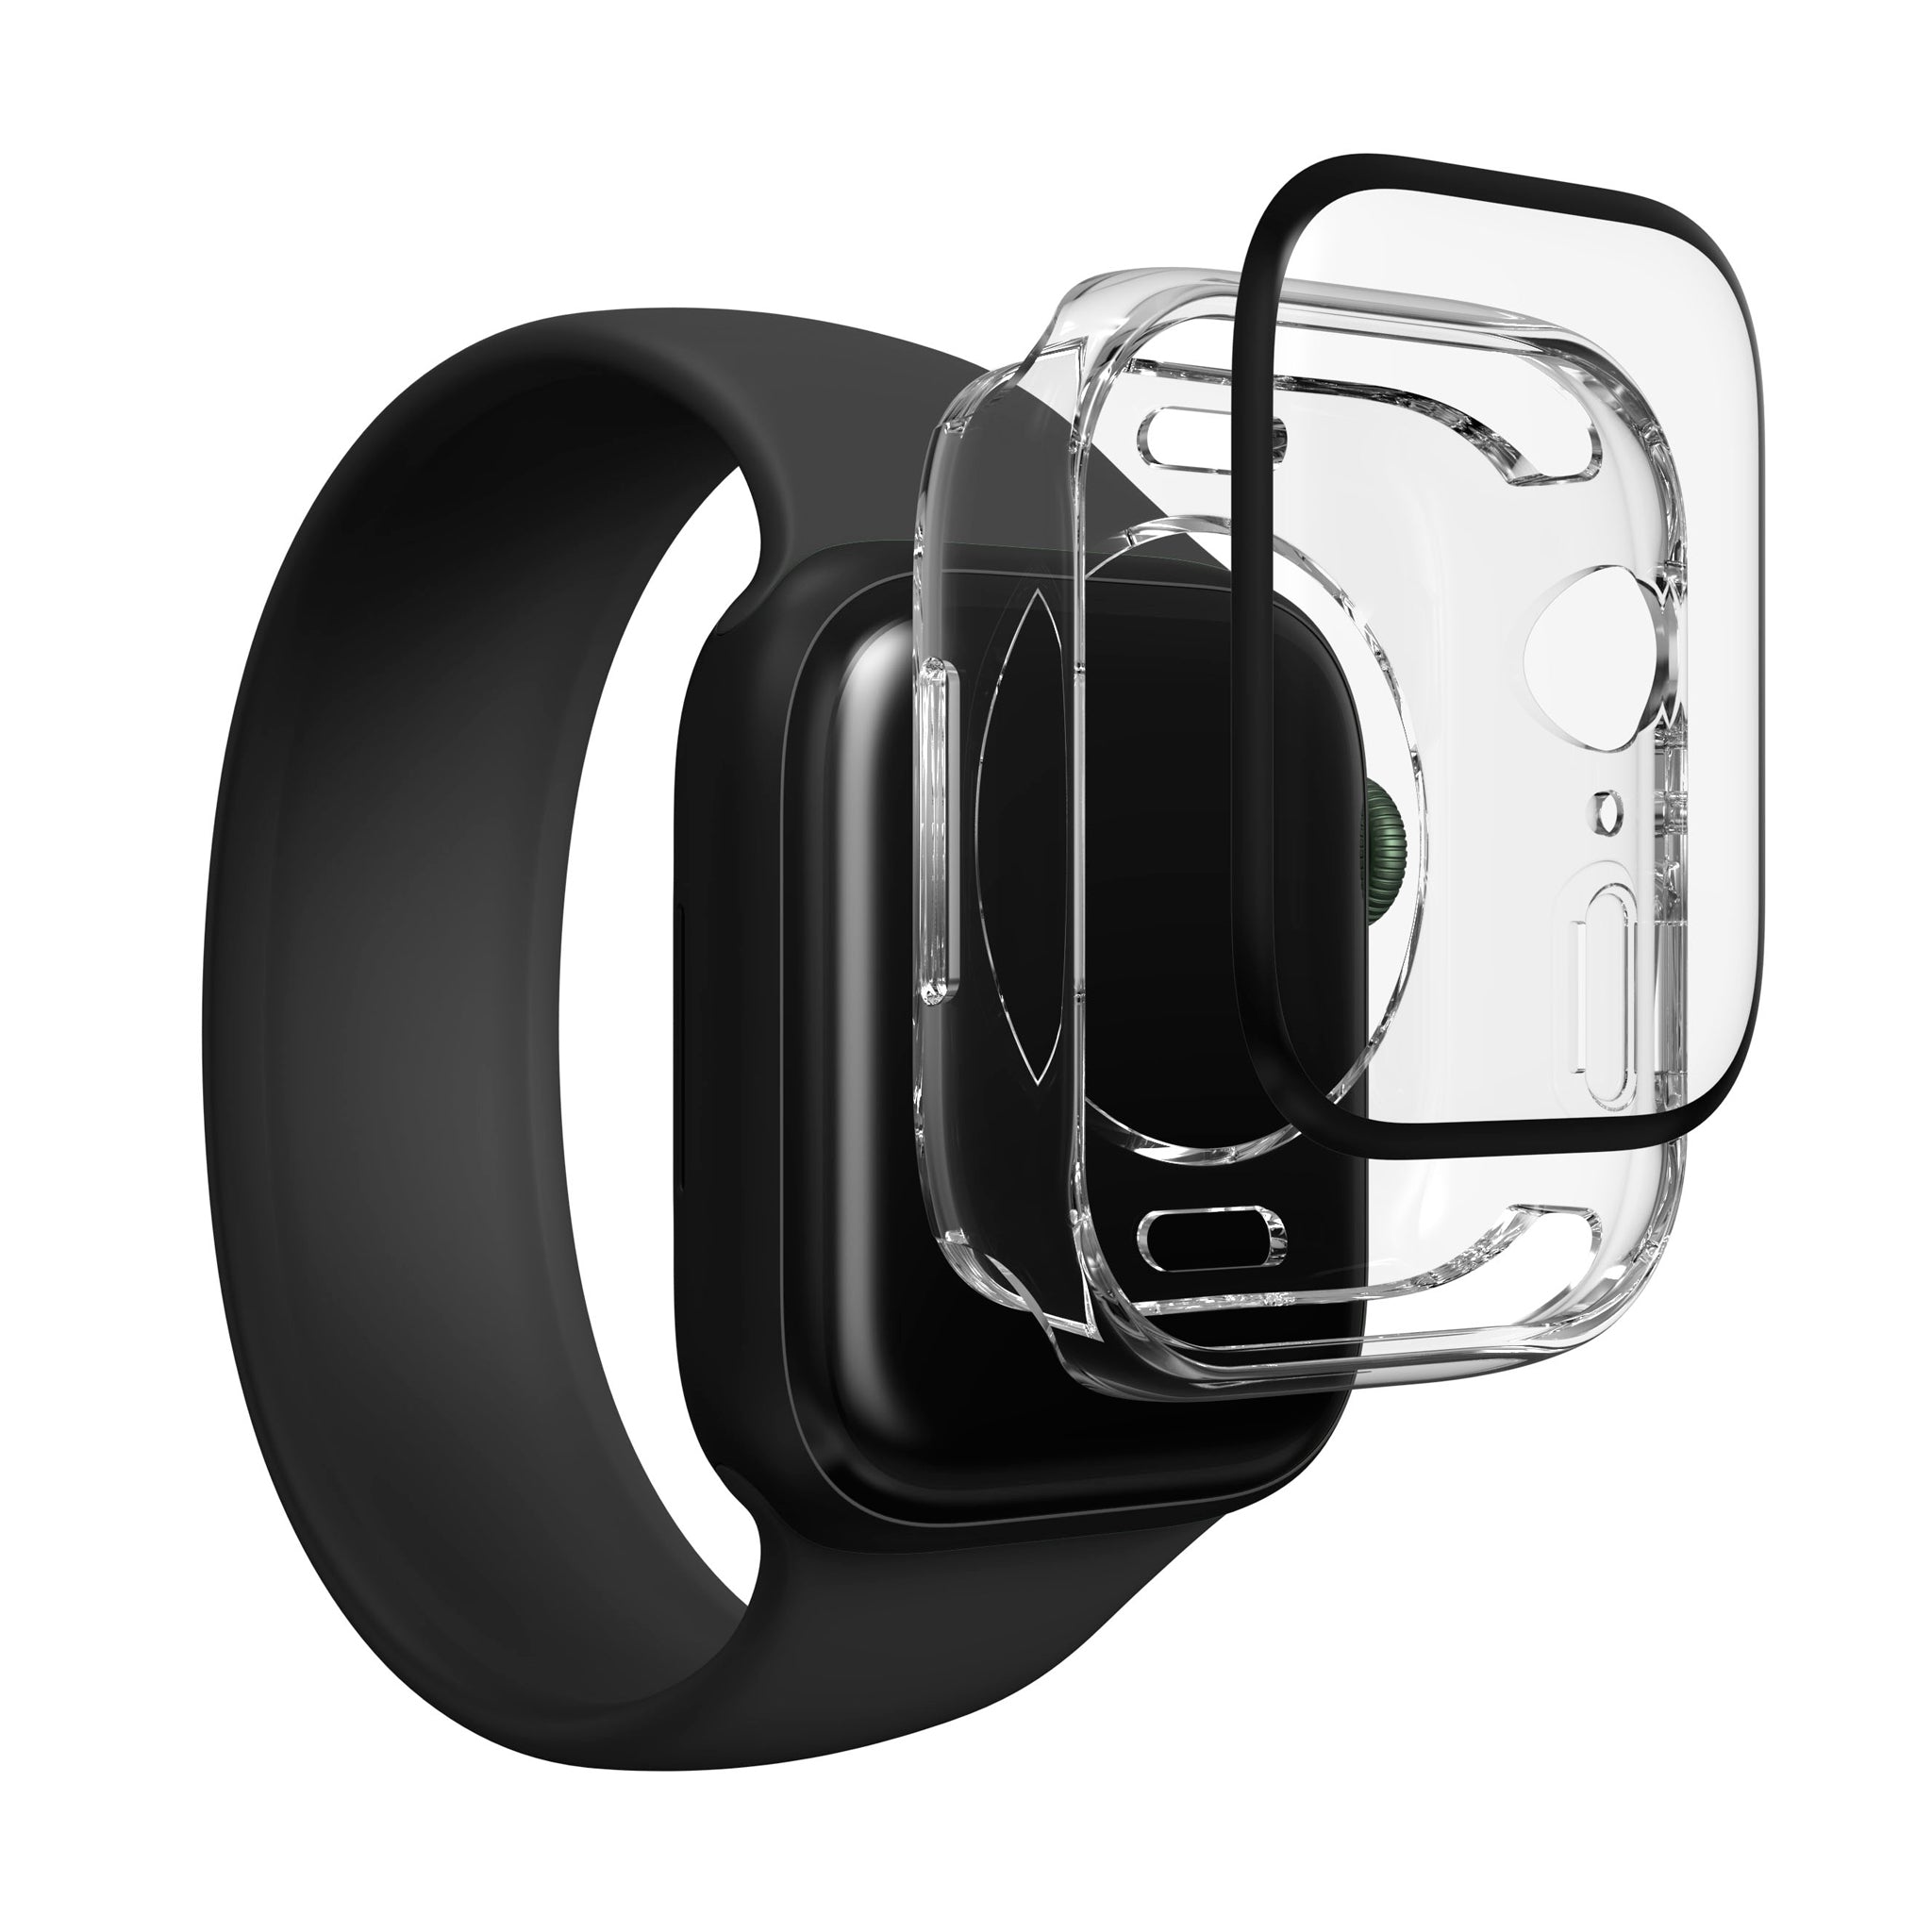 Zagg - Invisibleshield Glassfusion 360 Plus Screen Protector For Apple Watch 45mm - Clear